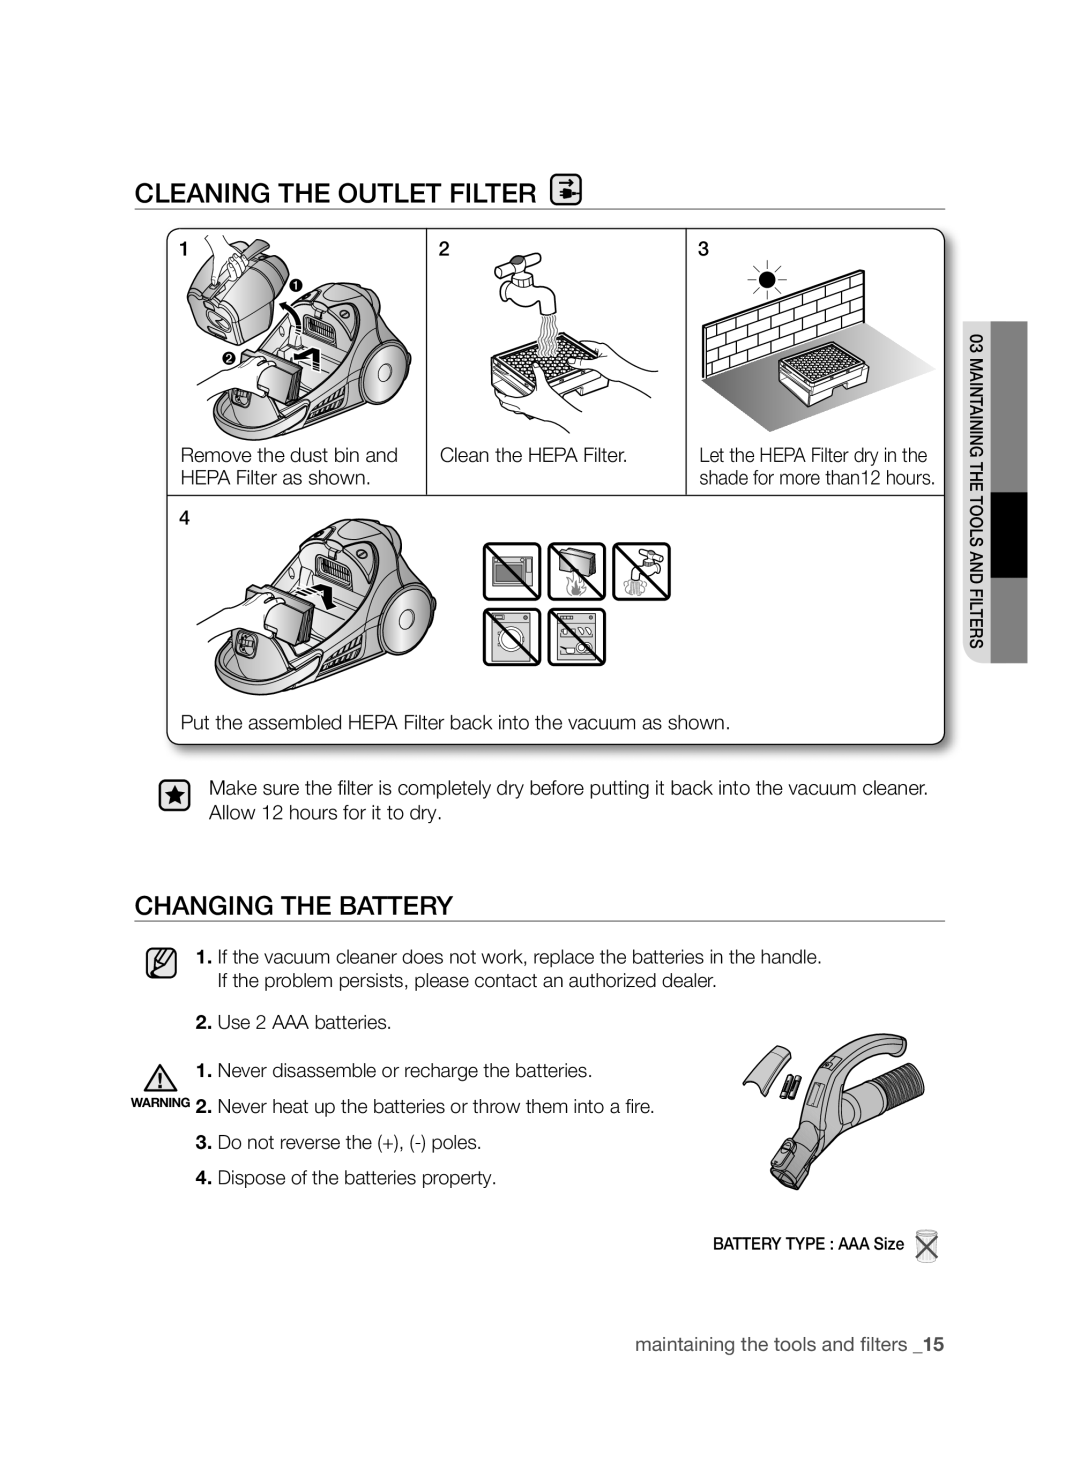 Samsung VCC96P0H1G user manual Cleaning The Outlet Filter, Changing The Battery, maintaining the tools and filters_15 